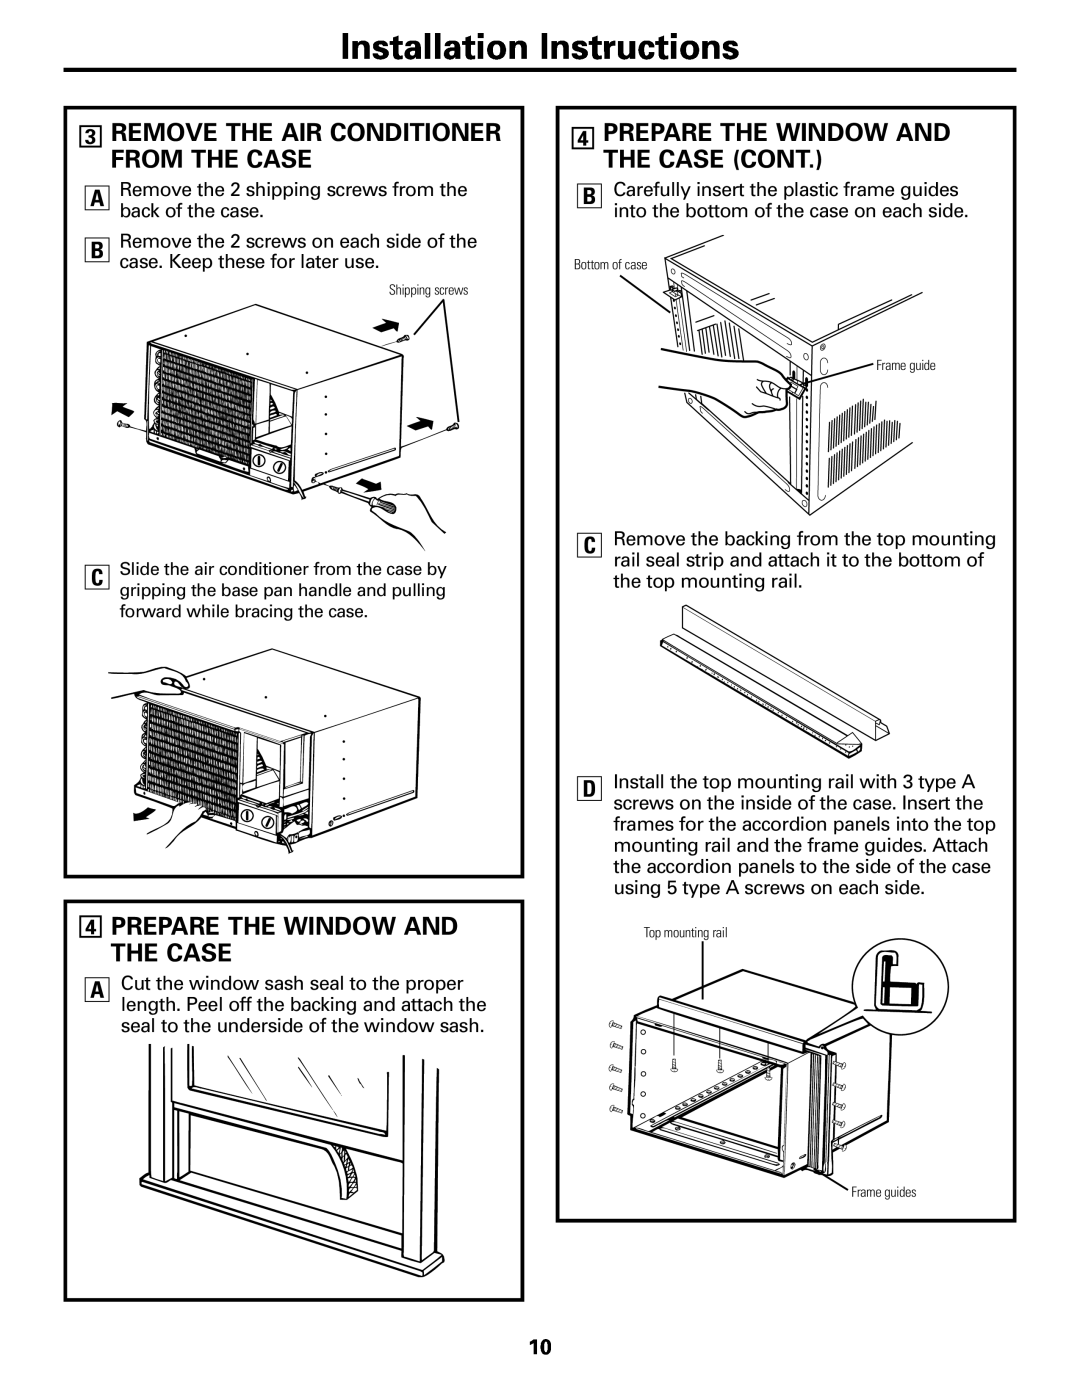 GE AGE14, AGE21 3REMOVE THE AIR CONDITIONER FROM THE CASE, 4PREPARE THE WINDOW AND THE CASE, Installation Instructions 